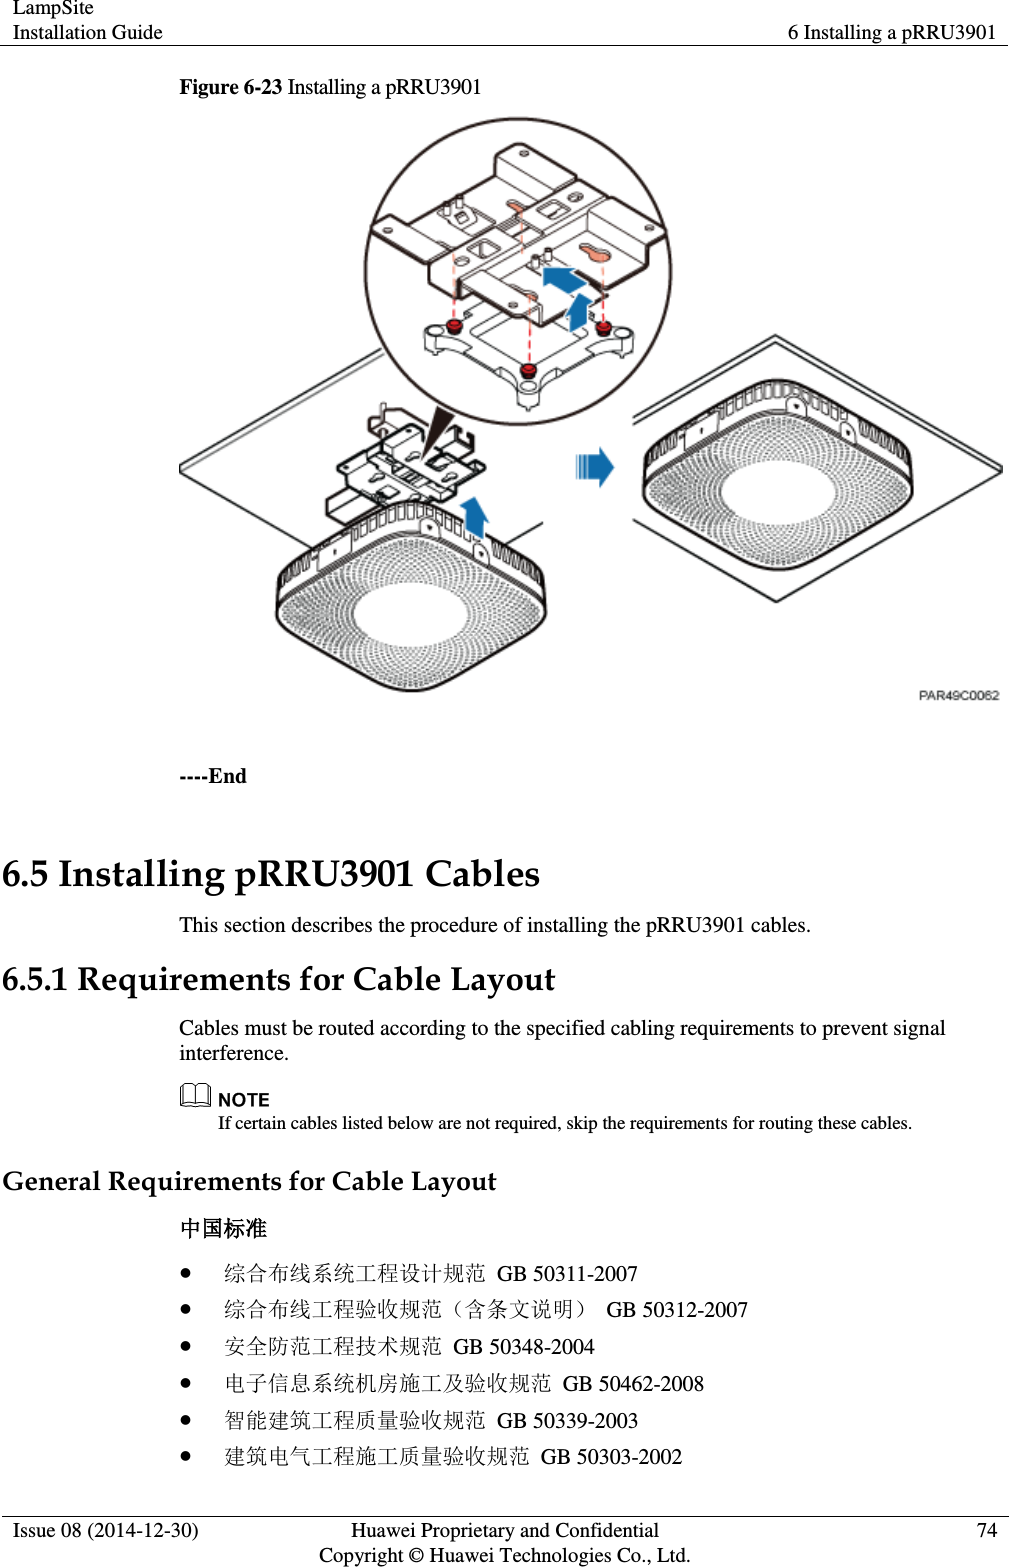 LampSite Installation Guide 6 Installing a pRRU3901  Issue 08 (2014-12-30) Huawei Proprietary and Confidential                                     Copyright © Huawei Technologies Co., Ltd. 74  Figure 6-23 Installing a pRRU3901   ----End 6.5 Installing pRRU3901 Cables This section describes the procedure of installing the pRRU3901 cables. 6.5.1 Requirements for Cable Layout Cables must be routed according to the specified cabling requirements to prevent signal interference.    If certain cables listed below are not required, skip the requirements for routing these cables. General Requirements for Cable Layout 中国标准  综合布线系统工程设计规范  GB 50311-2007  综合布线工程验收规范（含条文说明）  GB 50312-2007  安全防范工程技术规范  GB 50348-2004  电子信息系统机房施工及验收规范  GB 50462-2008  智能建筑工程质量验收规范  GB 50339-2003  建筑电气工程施工质量验收规范  GB 50303-2002 